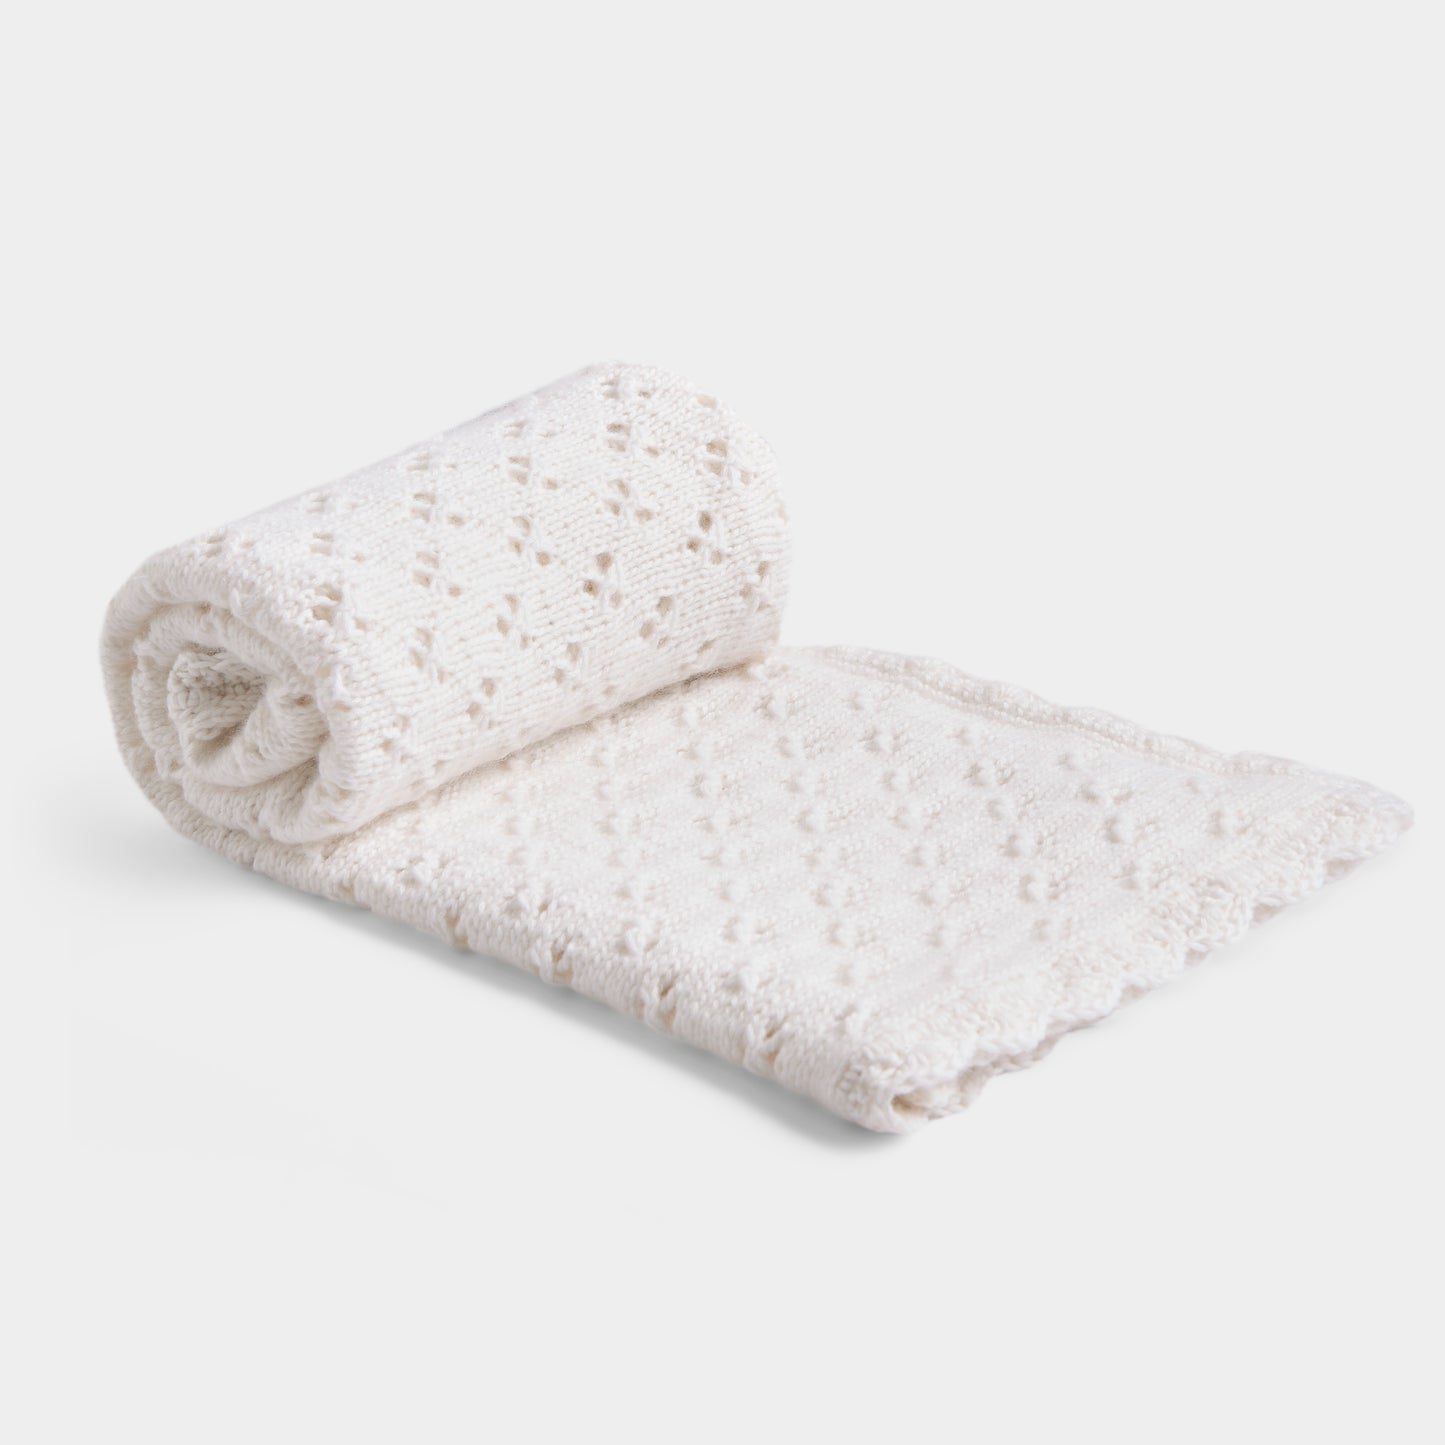 Hand Knitted Cloverleaf Lace Cashmere blanket